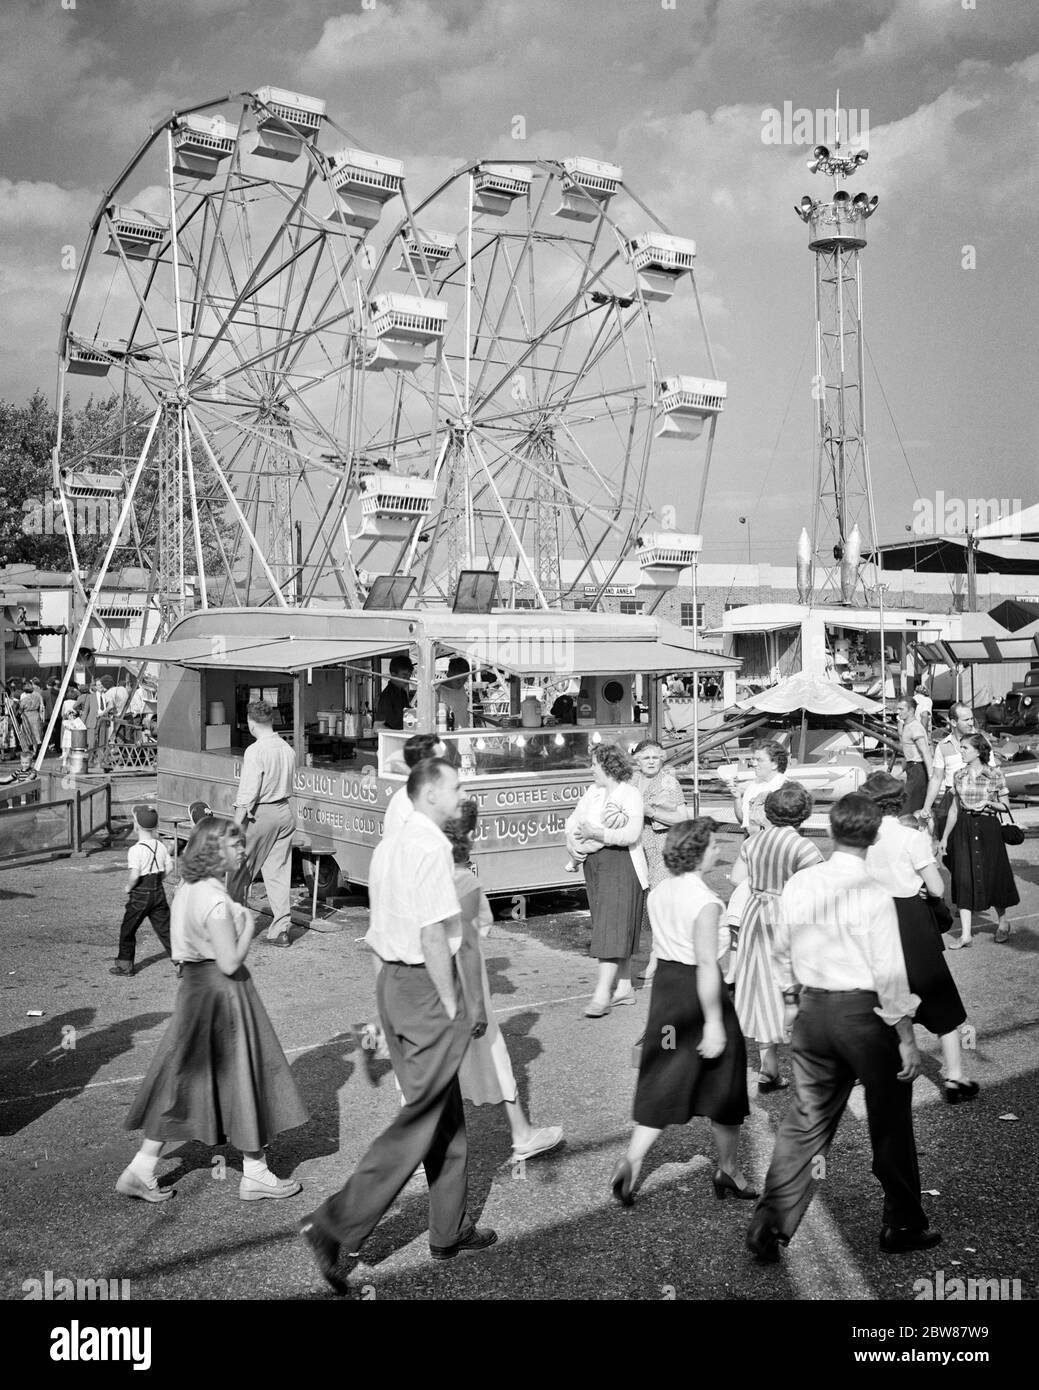 1950s CROWD MEN WOMEN TEENAGERS ATTENDING WALKING ON THE MIDWAY OF THE YORK COUNTY FAIR PENNSYLVANIA USA - f10591 HEL001 HARS JUVENILE MANY STYLE RIDE JOY LIFESTYLE CELEBRATION CROWDS FEMALES ASSEMBLY RURAL COPY SPACE FULL-LENGTH LADIES MASS COUNTY PERSONS MALES CARNIVAL ENTERTAINMENT SPECTATORS B&W GATHERING HAPPINESS ADVENTURE LEISURE EXCITEMENT PA RECREATION COMMONWEALTH VENDER CONCEPTUAL KEYSTONE STATE MIDWAY STYLISH TEENAGED ATTENDING CONCESSIONS JUVENILES RIDES THRONG AMUSEMENT PARK ATTENDANCE BLACK AND WHITE CAUCASIAN ETHNICITY FERRIS WHEEL OLD FASHIONED Stock Photo